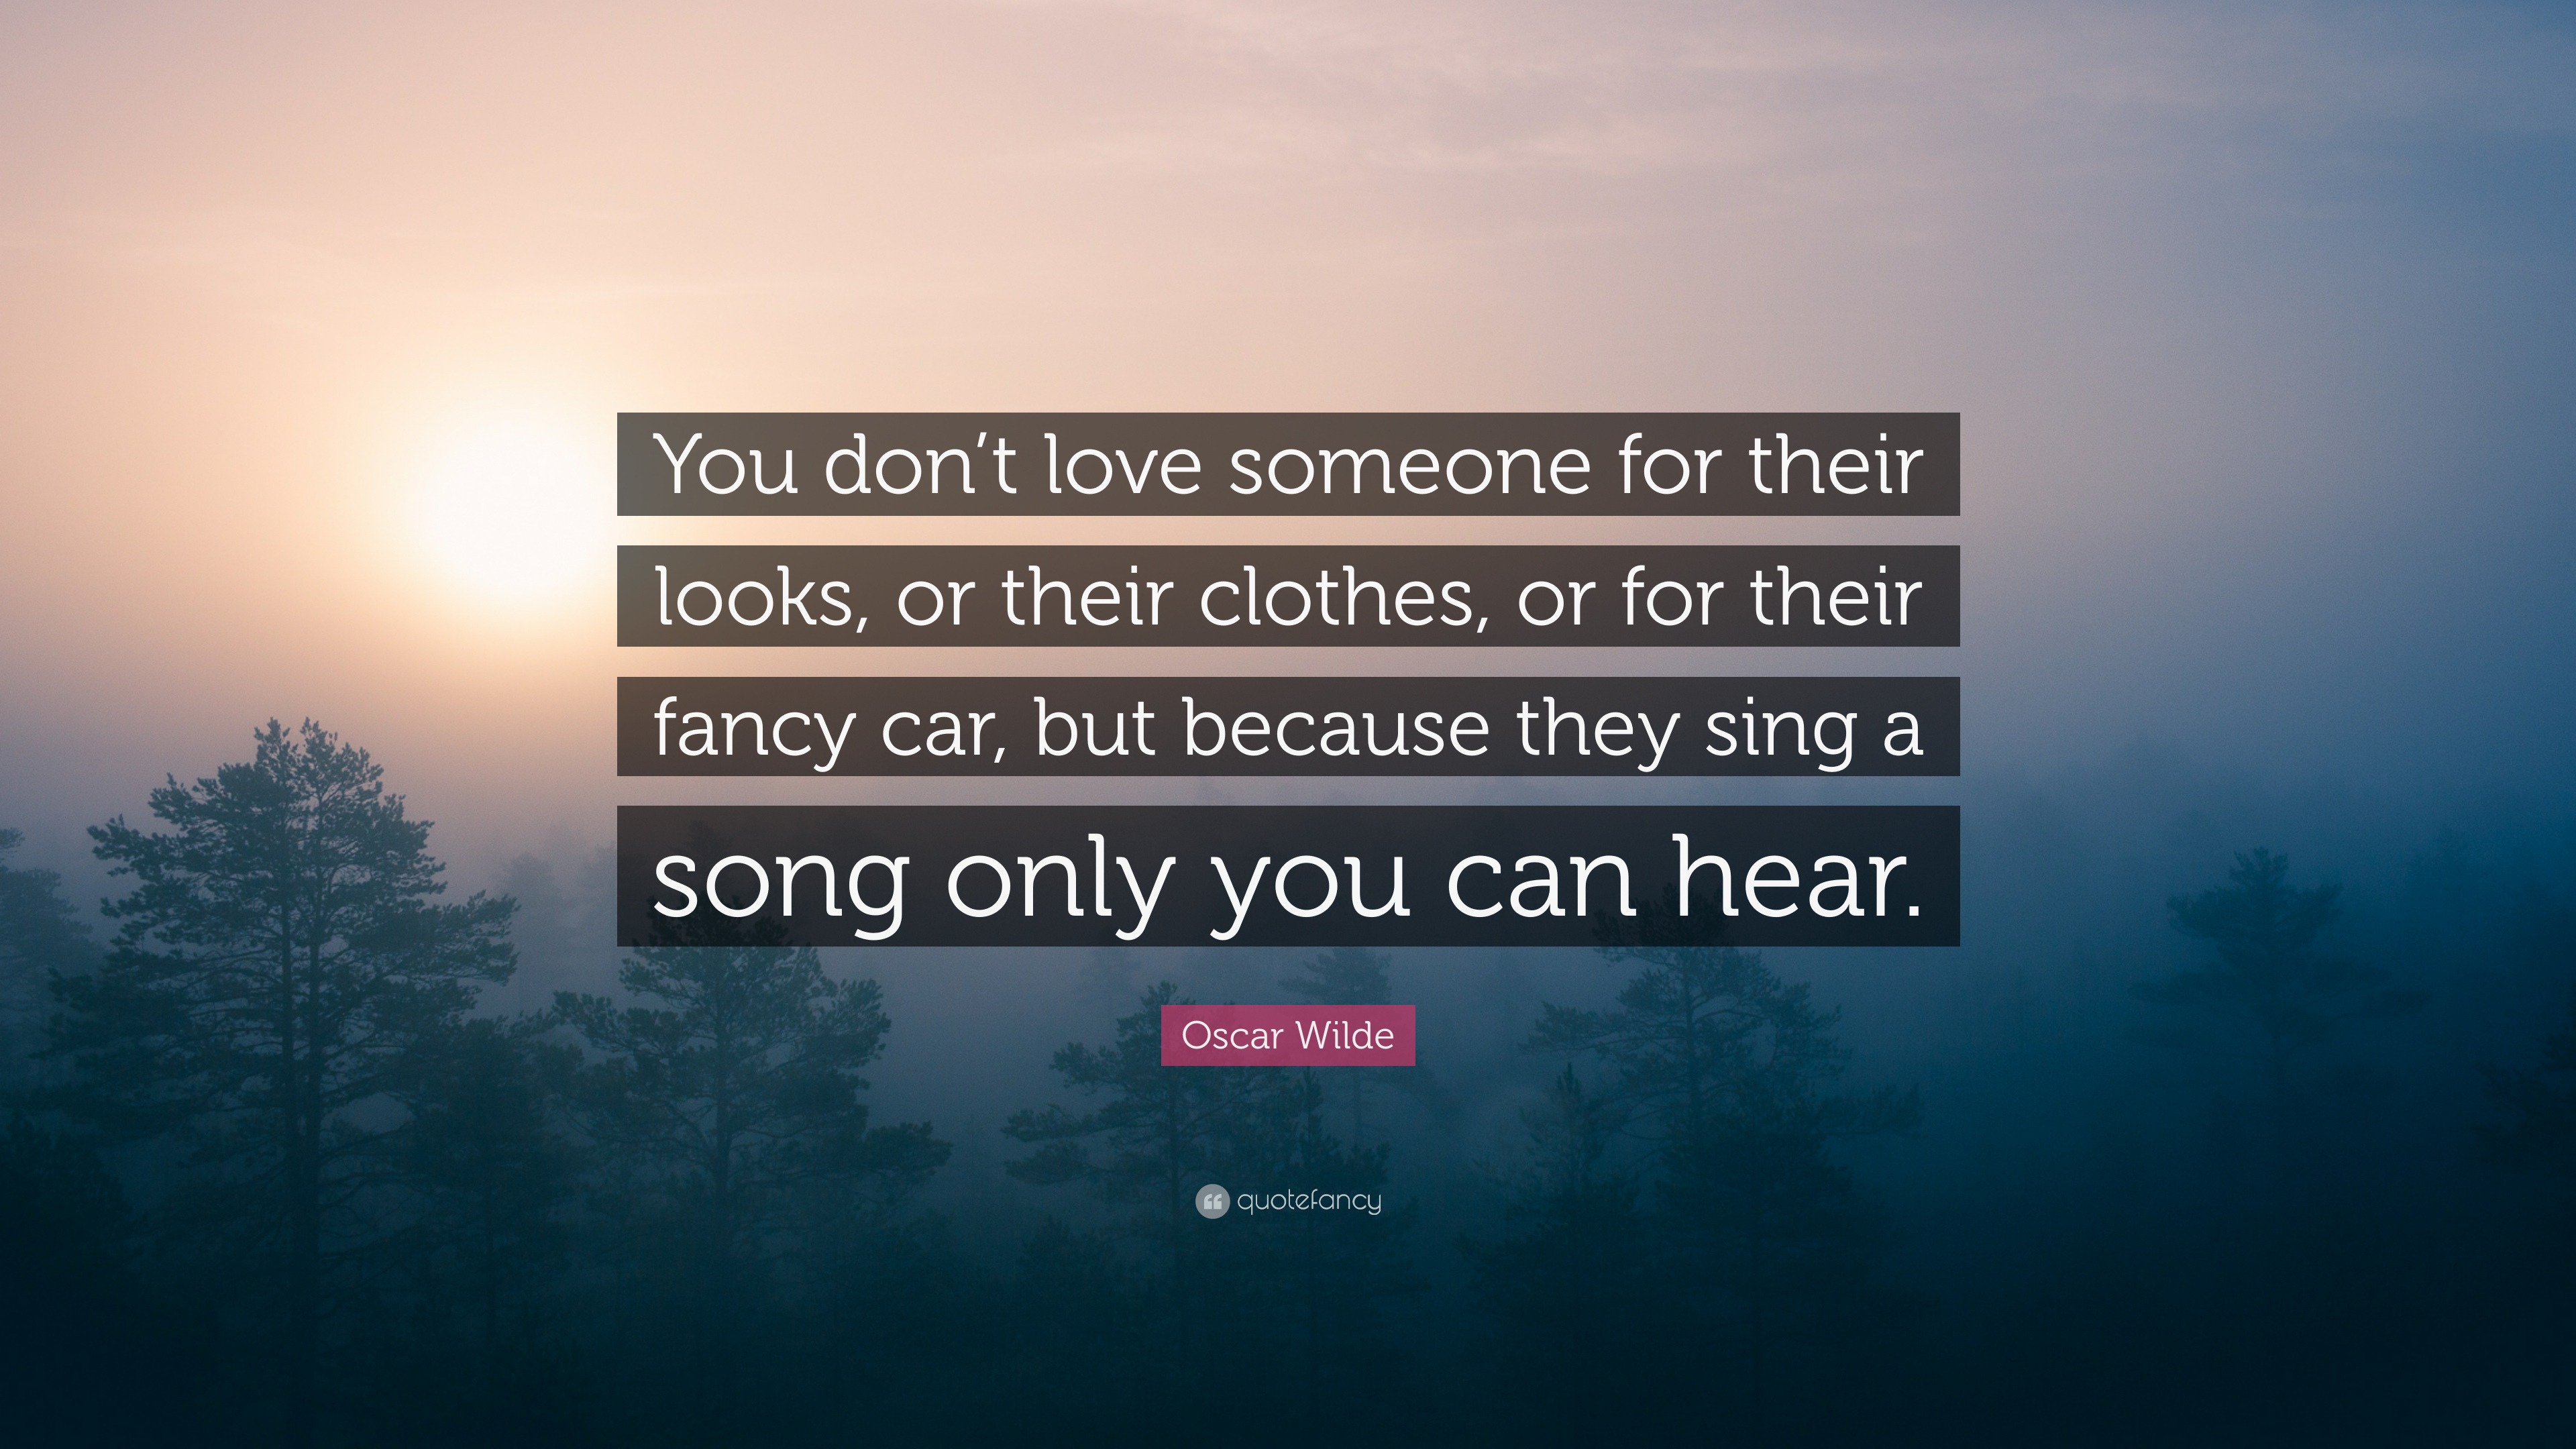 oscar wilde don someone looks quote clothes fancy song quotes because sing hear quotefancy